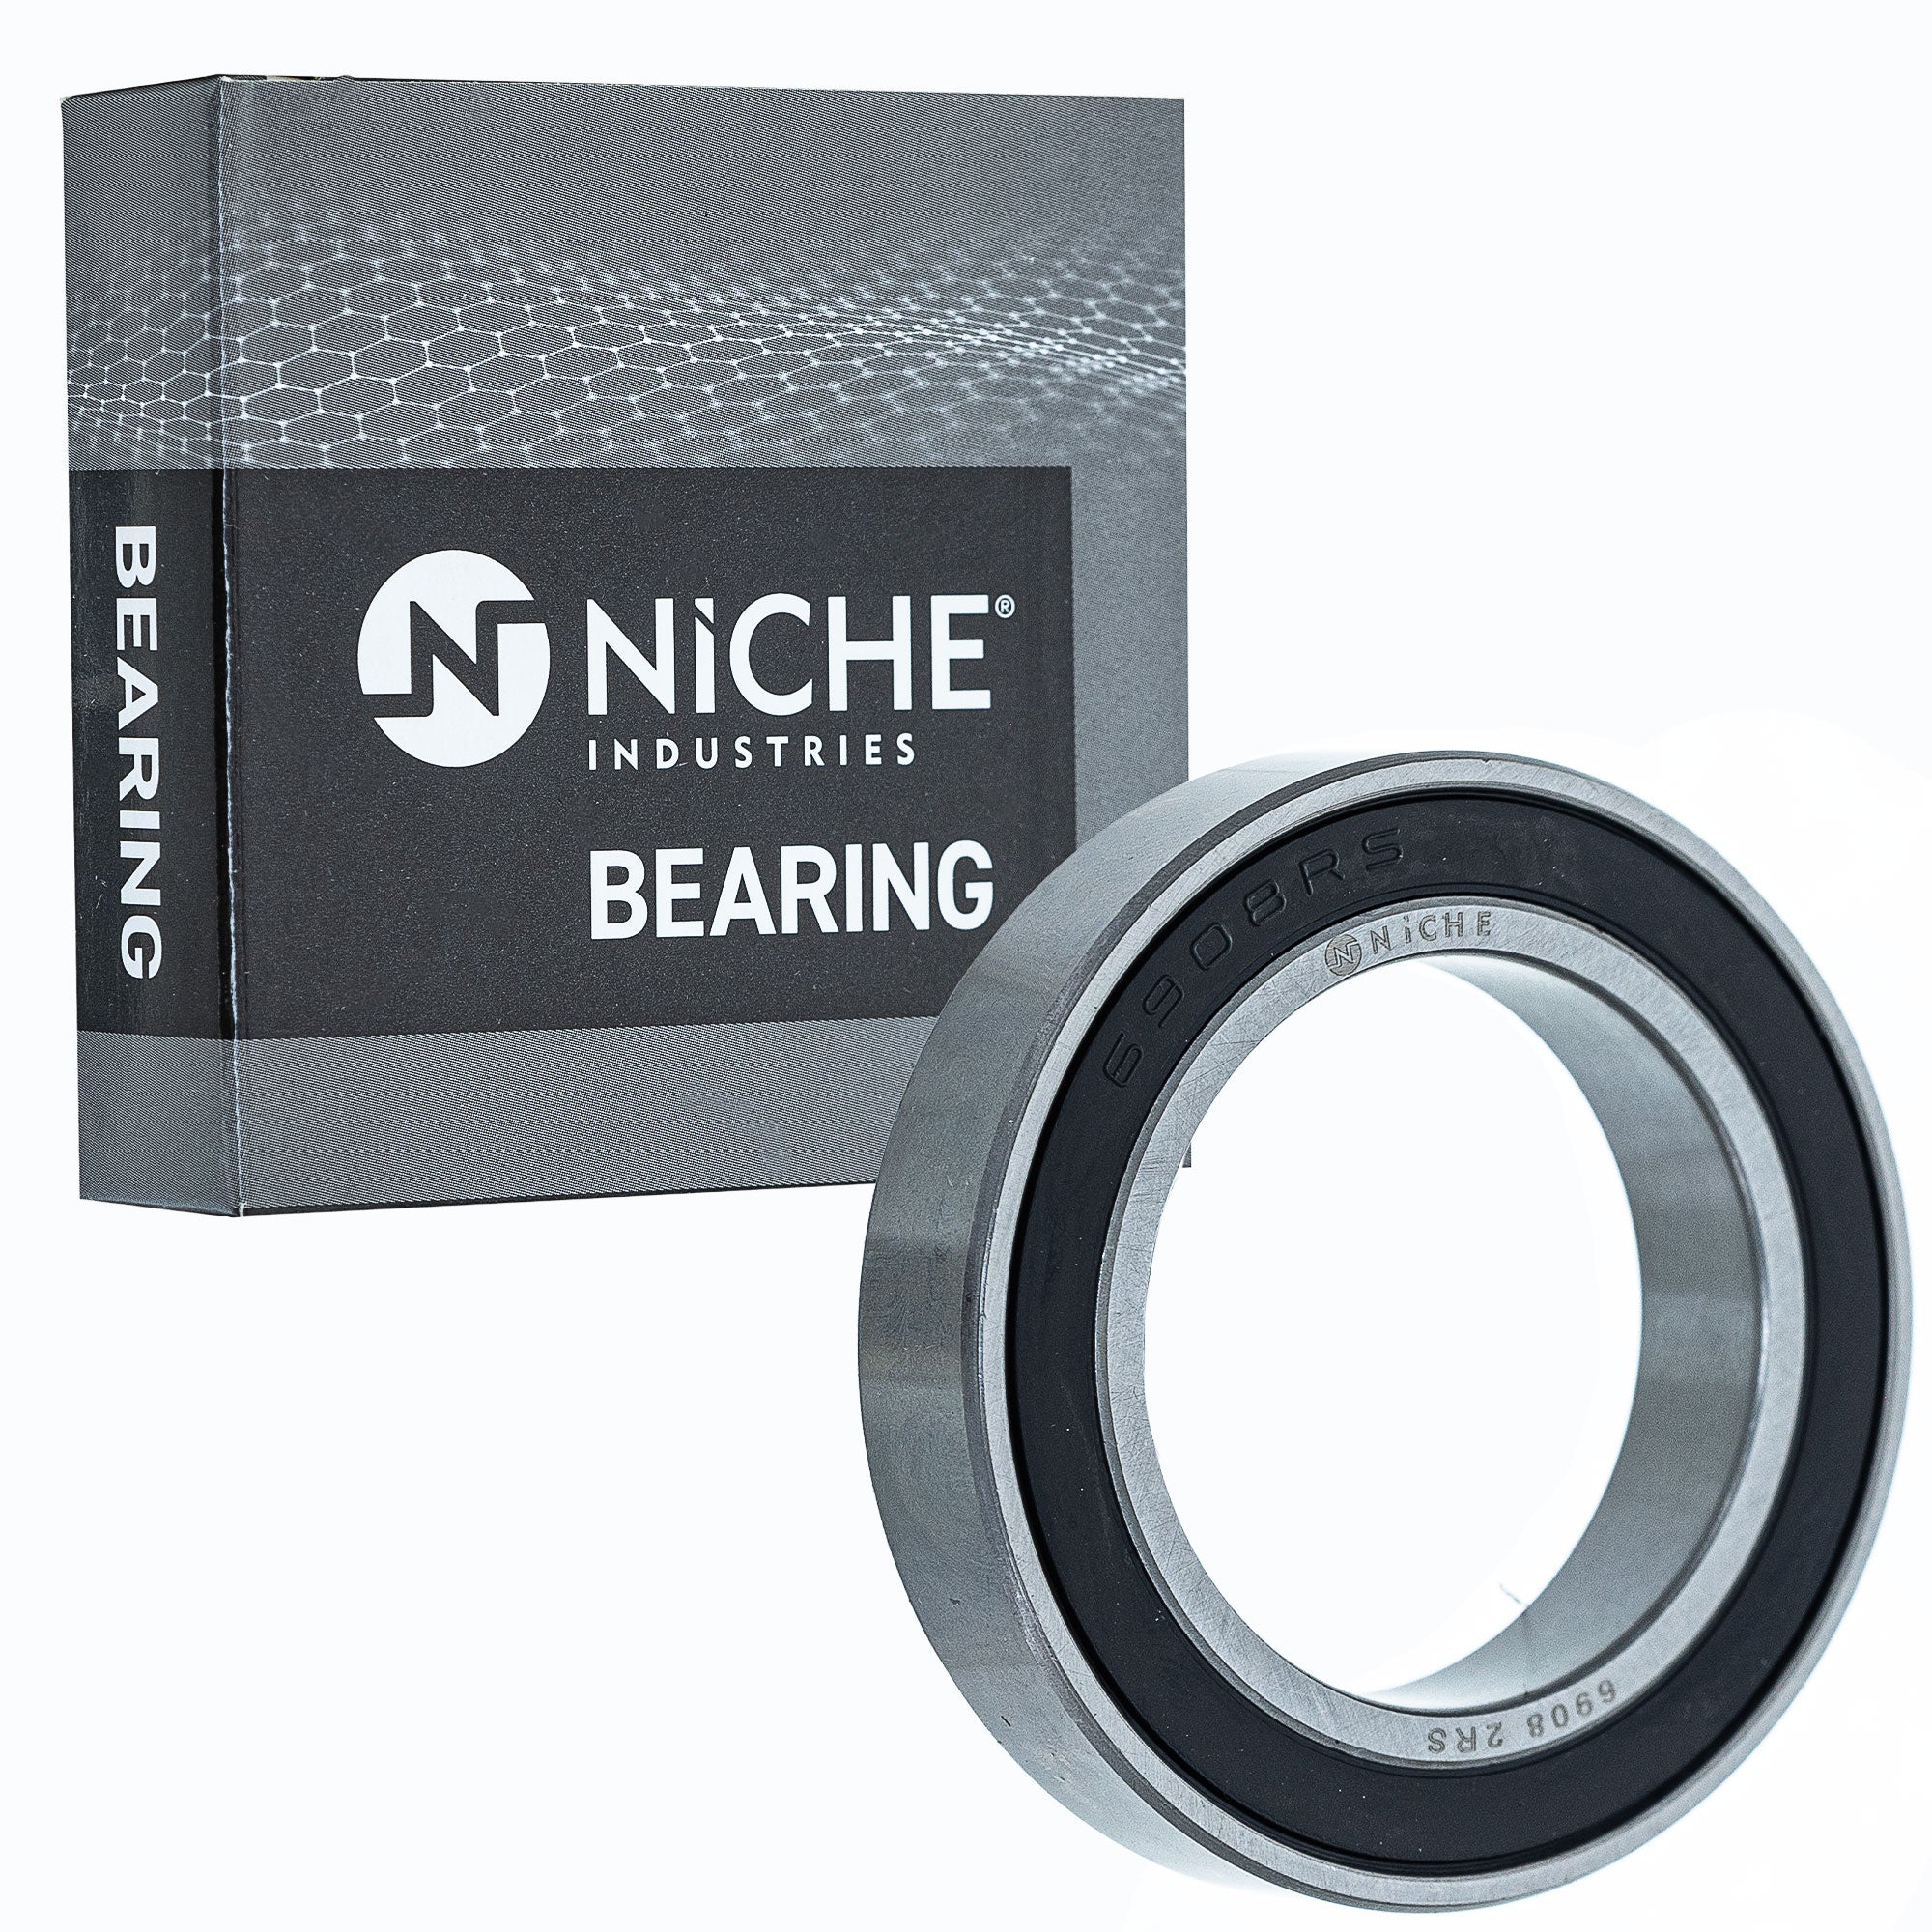 NICHE 519-CBB2248R Bearing & Seal Kit 2-Pack for zOTHER BRP Can-Am